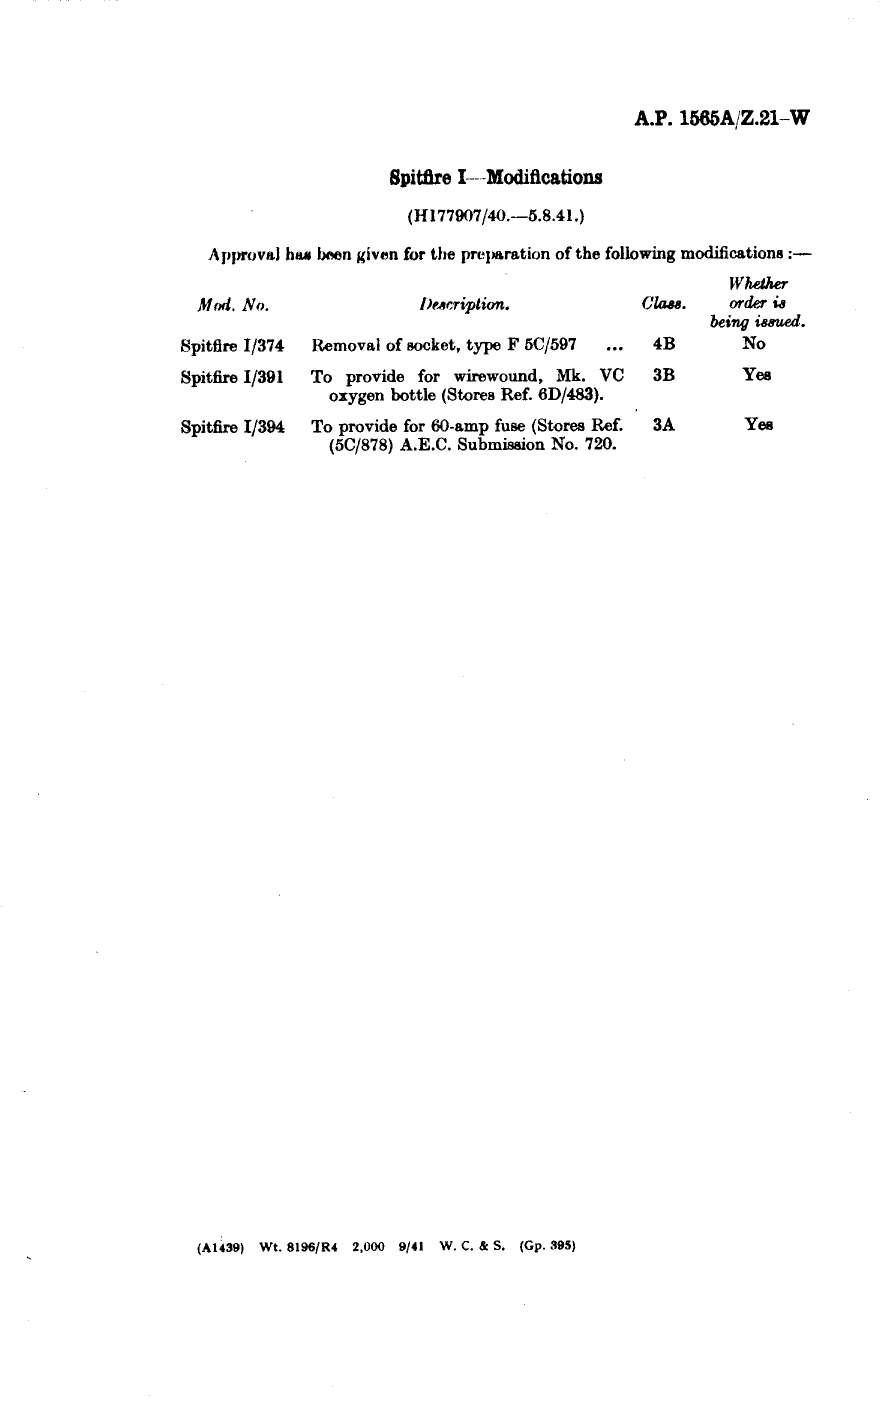 Sample page 1 from AirCorps Library document: Spitfire I Modifications 374, 391 and 394